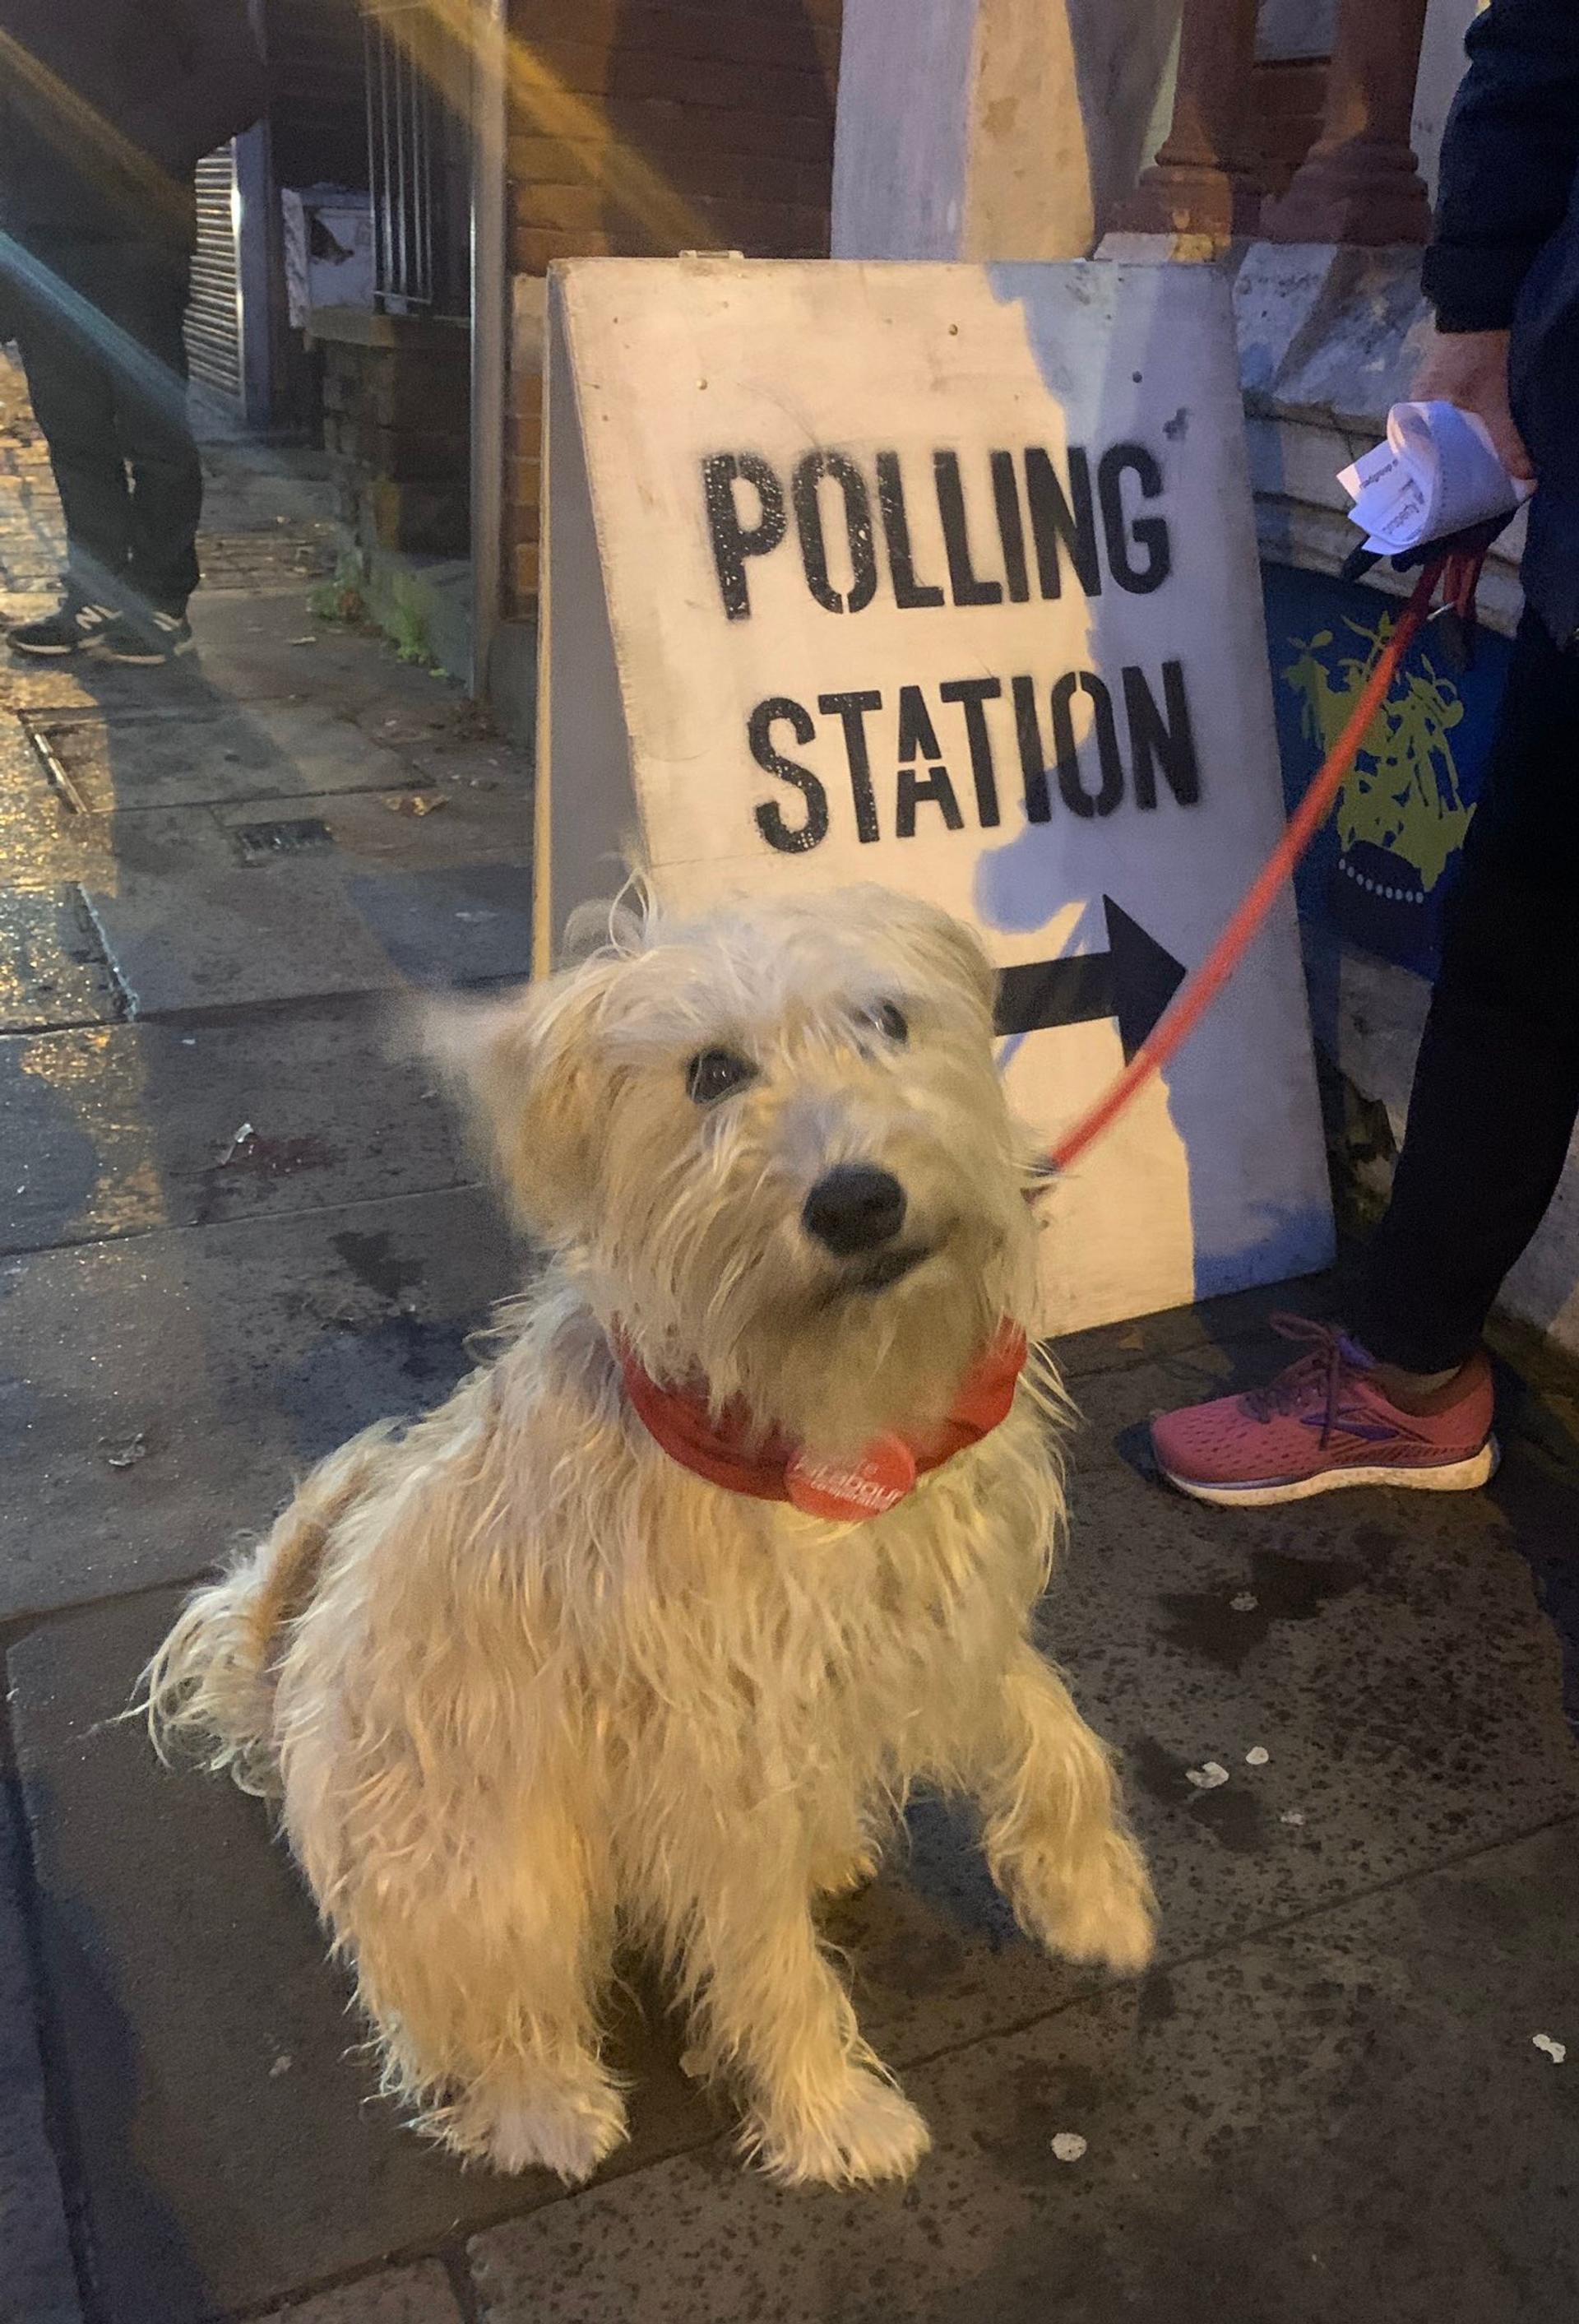 @paulmasonnews Dec 12 My dog is staunch Labour but asks you to vote tactically in the places we can't win - to keep Johnson out #dogsatpollingstations